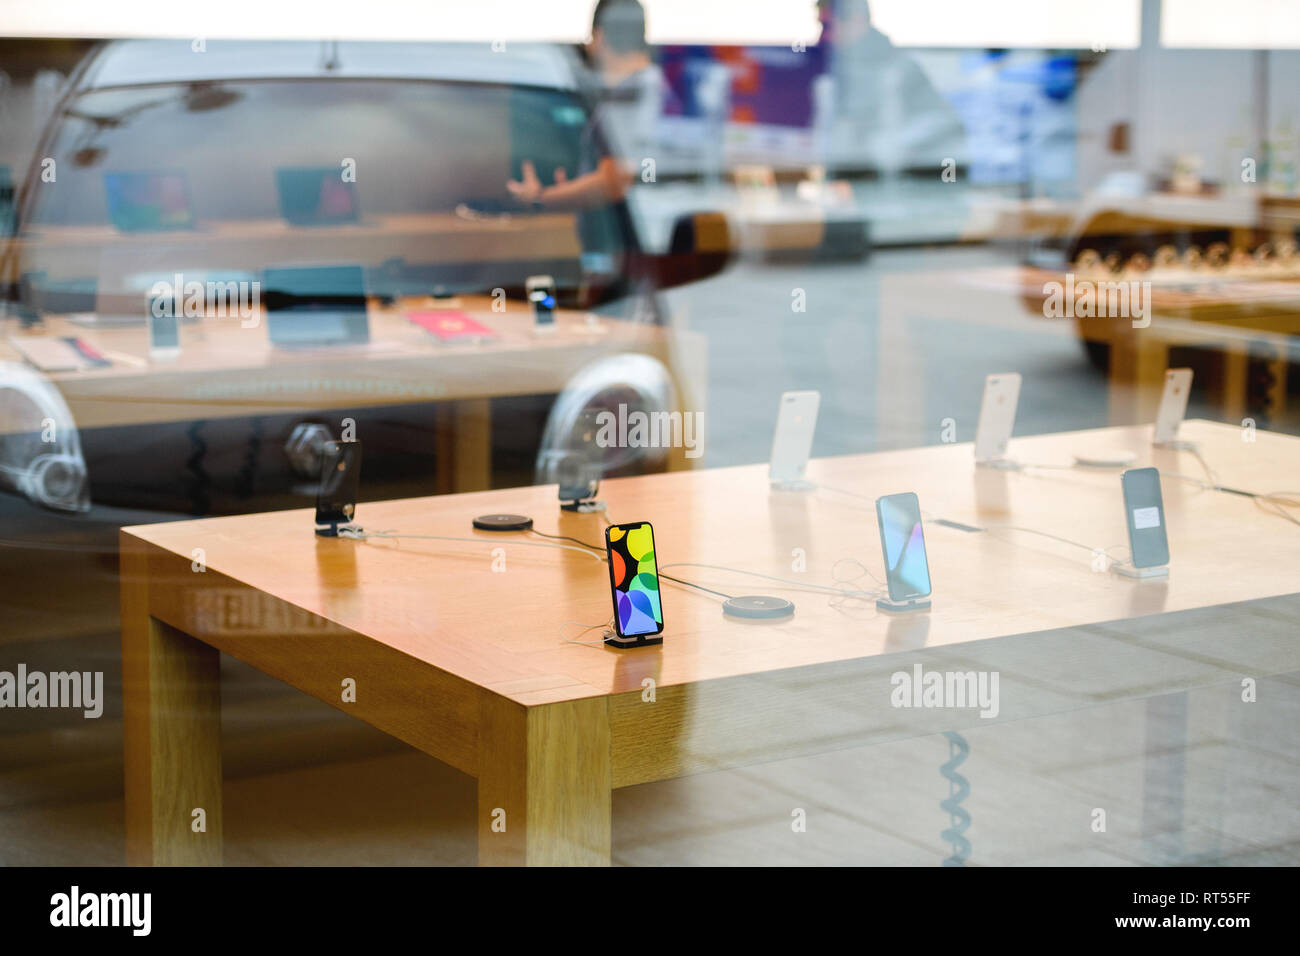 STRASBOURG, FRANCE - NOV 3, 2017: Latest Apple iPhone X and AirPower wireless Charging goes on sale in Apple Store worldwide with phones waiting to be tested by customers  Stock Photo